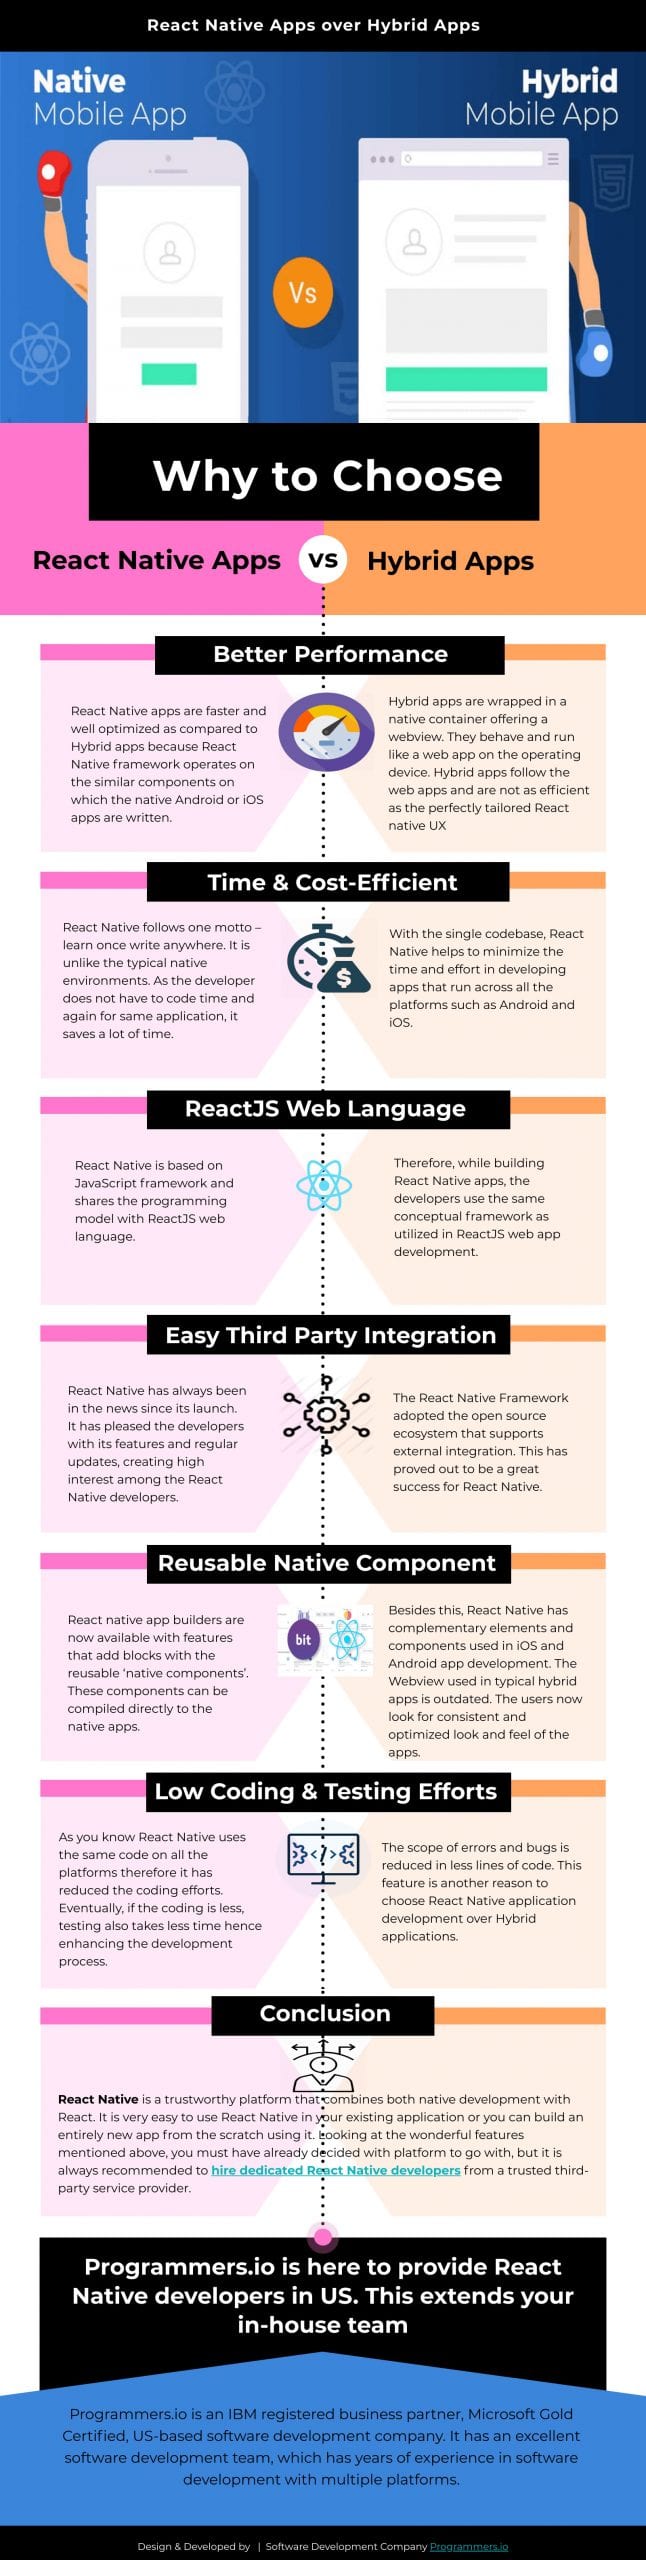 Reasons-to-choose-React-Native-Apps-over-Hybrid-Apps